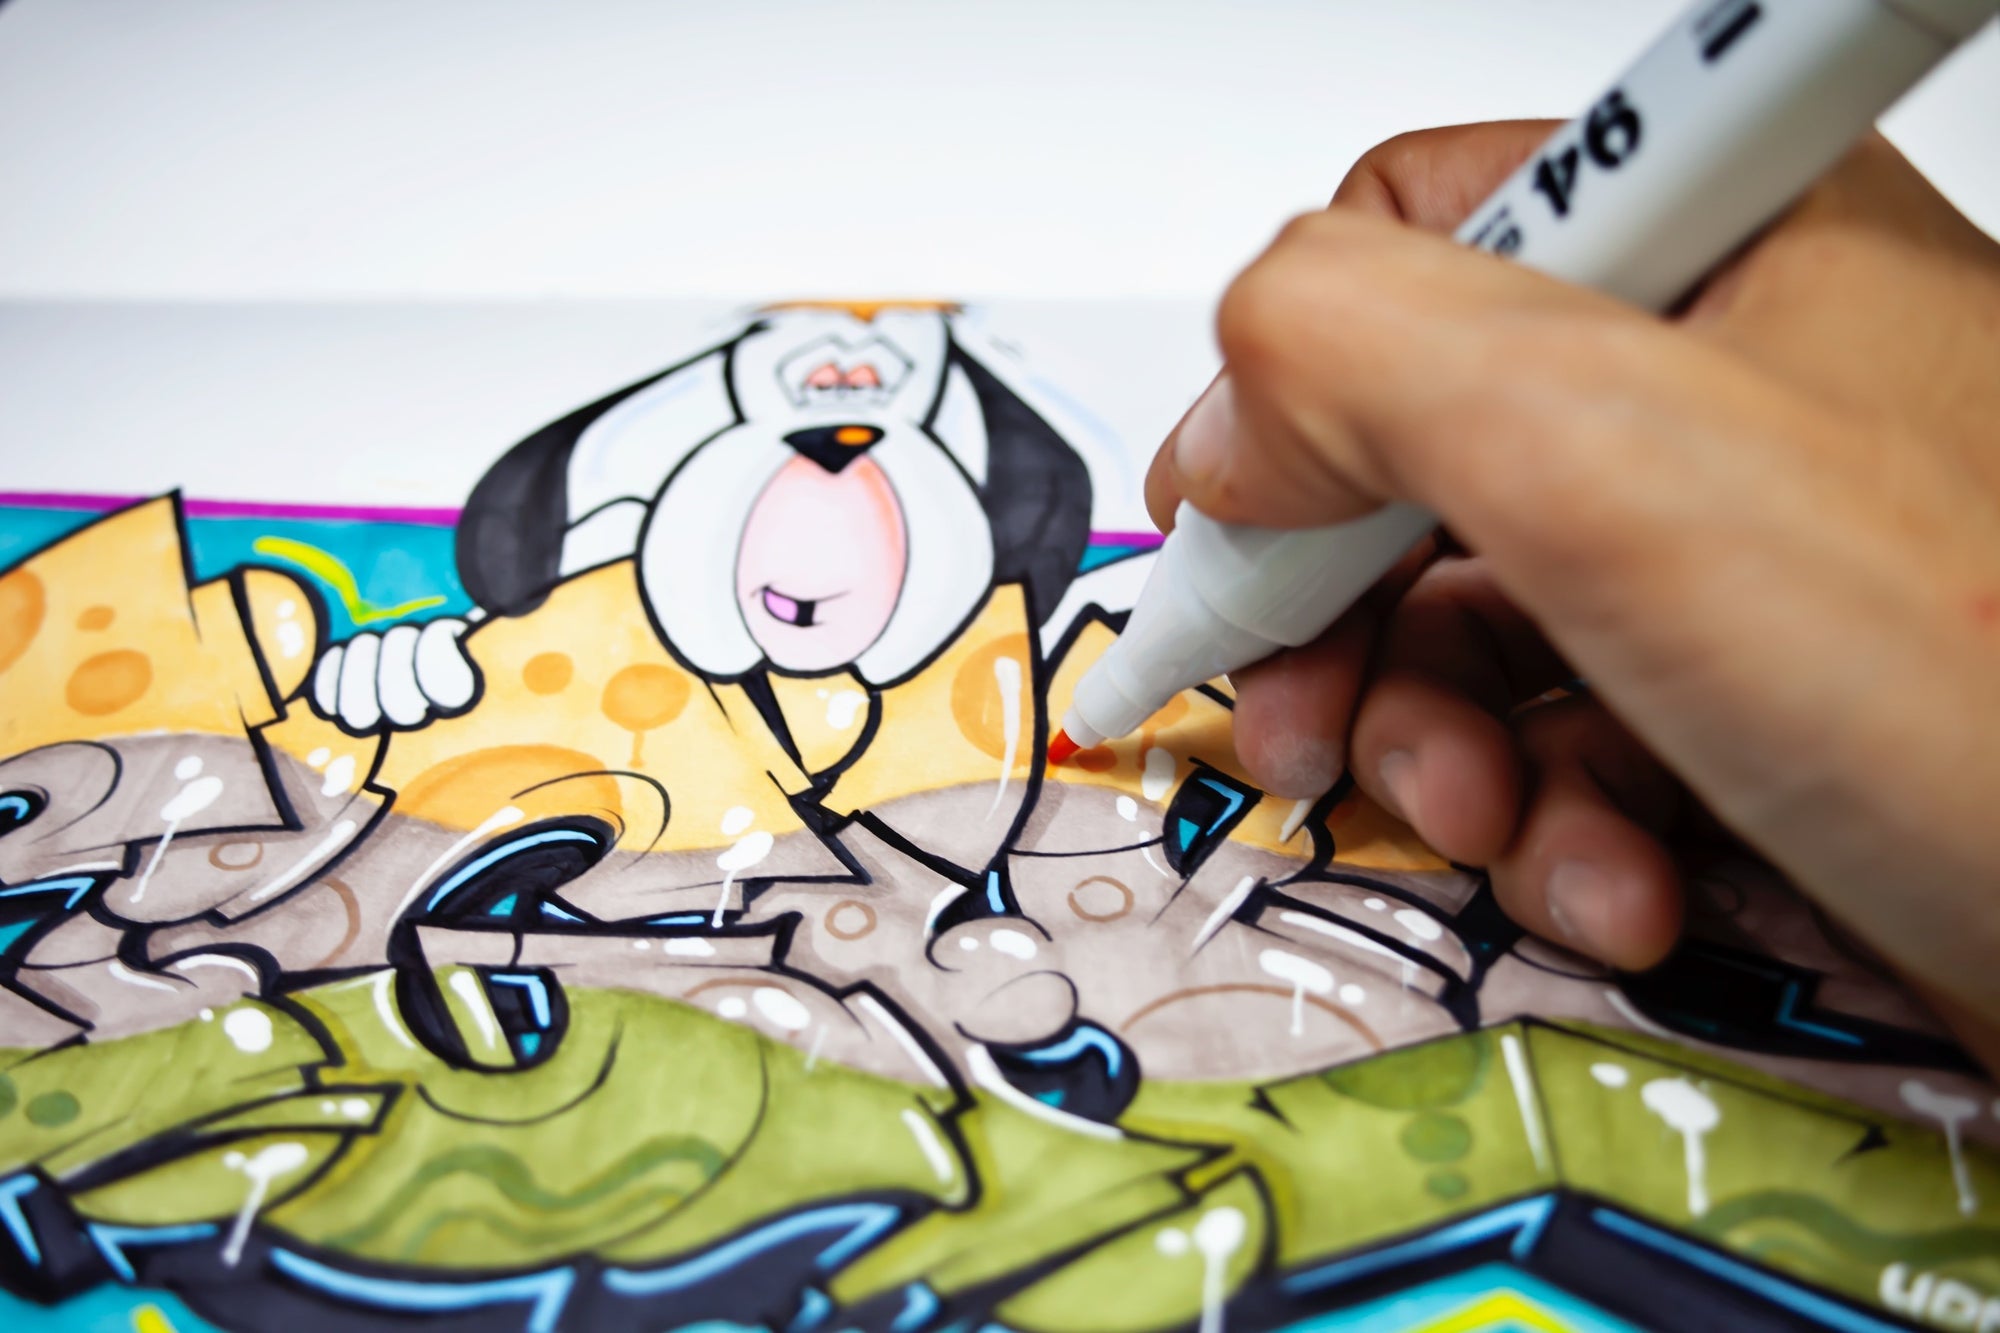 Graffiti Product Review: Montana Colors 94 Markers and Sketchbooks